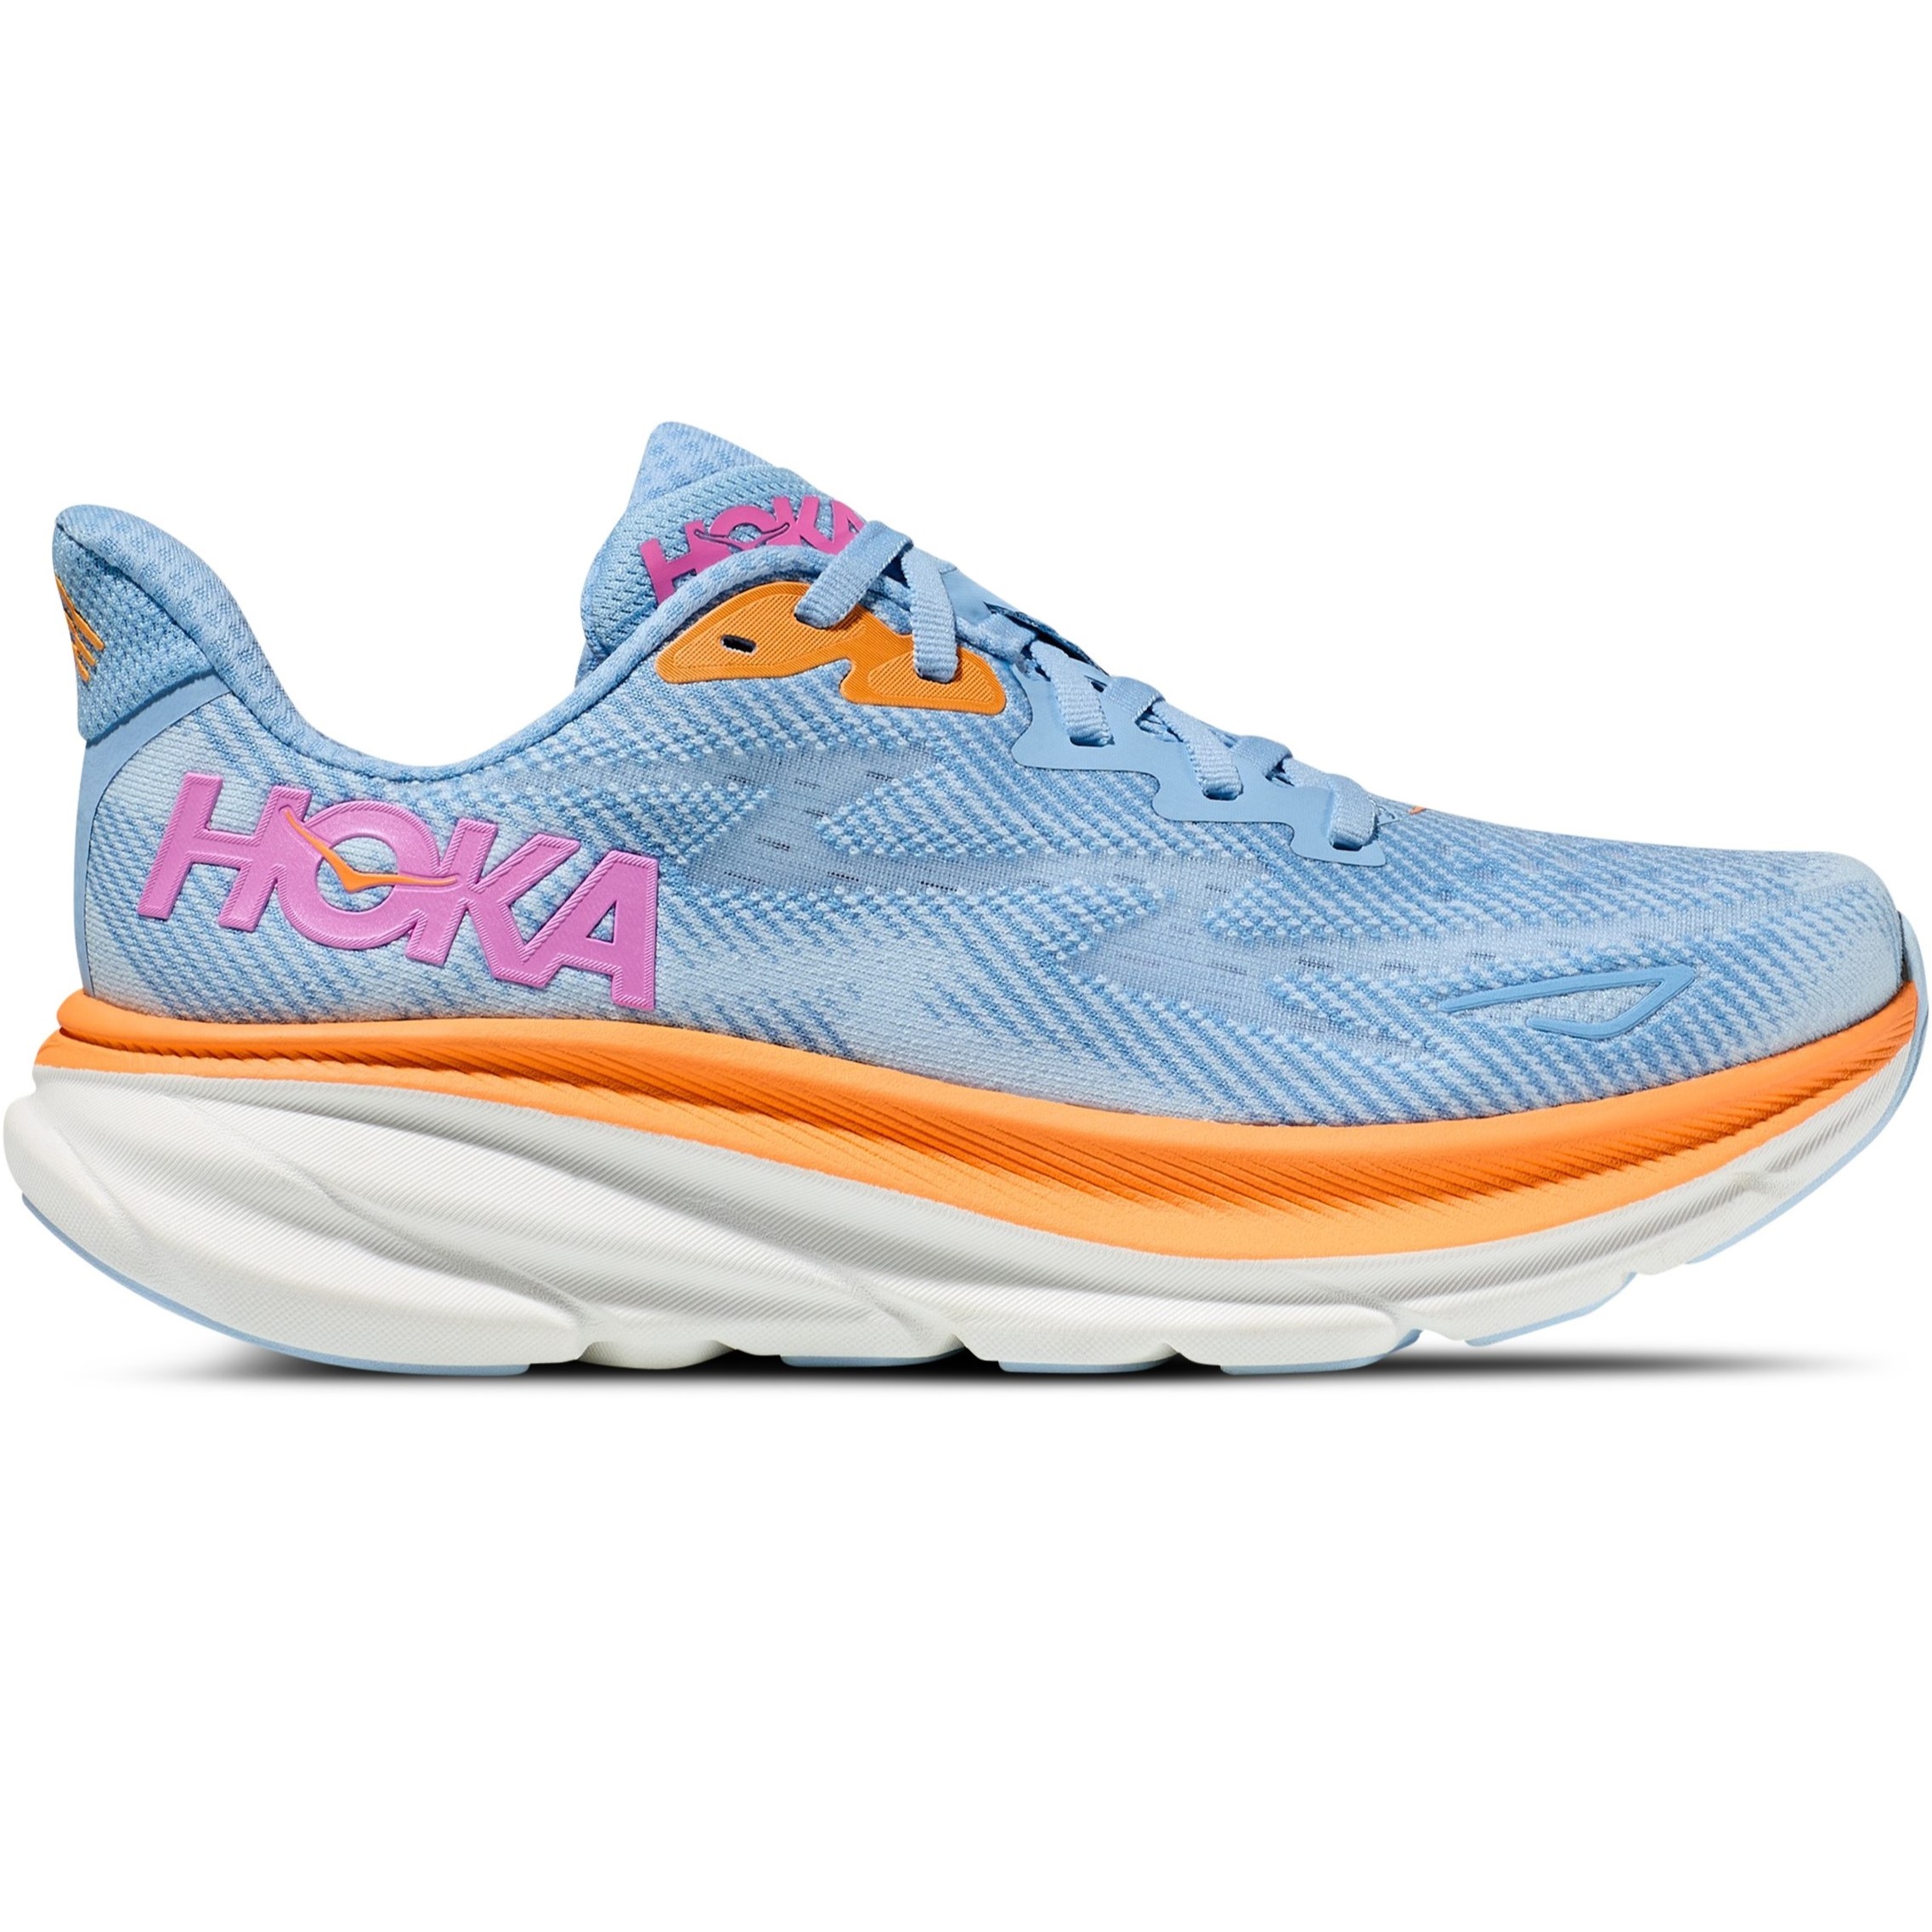 GIÀY HOKA NỮ CLIFTON 9 AIRY BLUE ICE WATER WOMEN ROAD RUNNING SHOES 1127896-ABIW 7